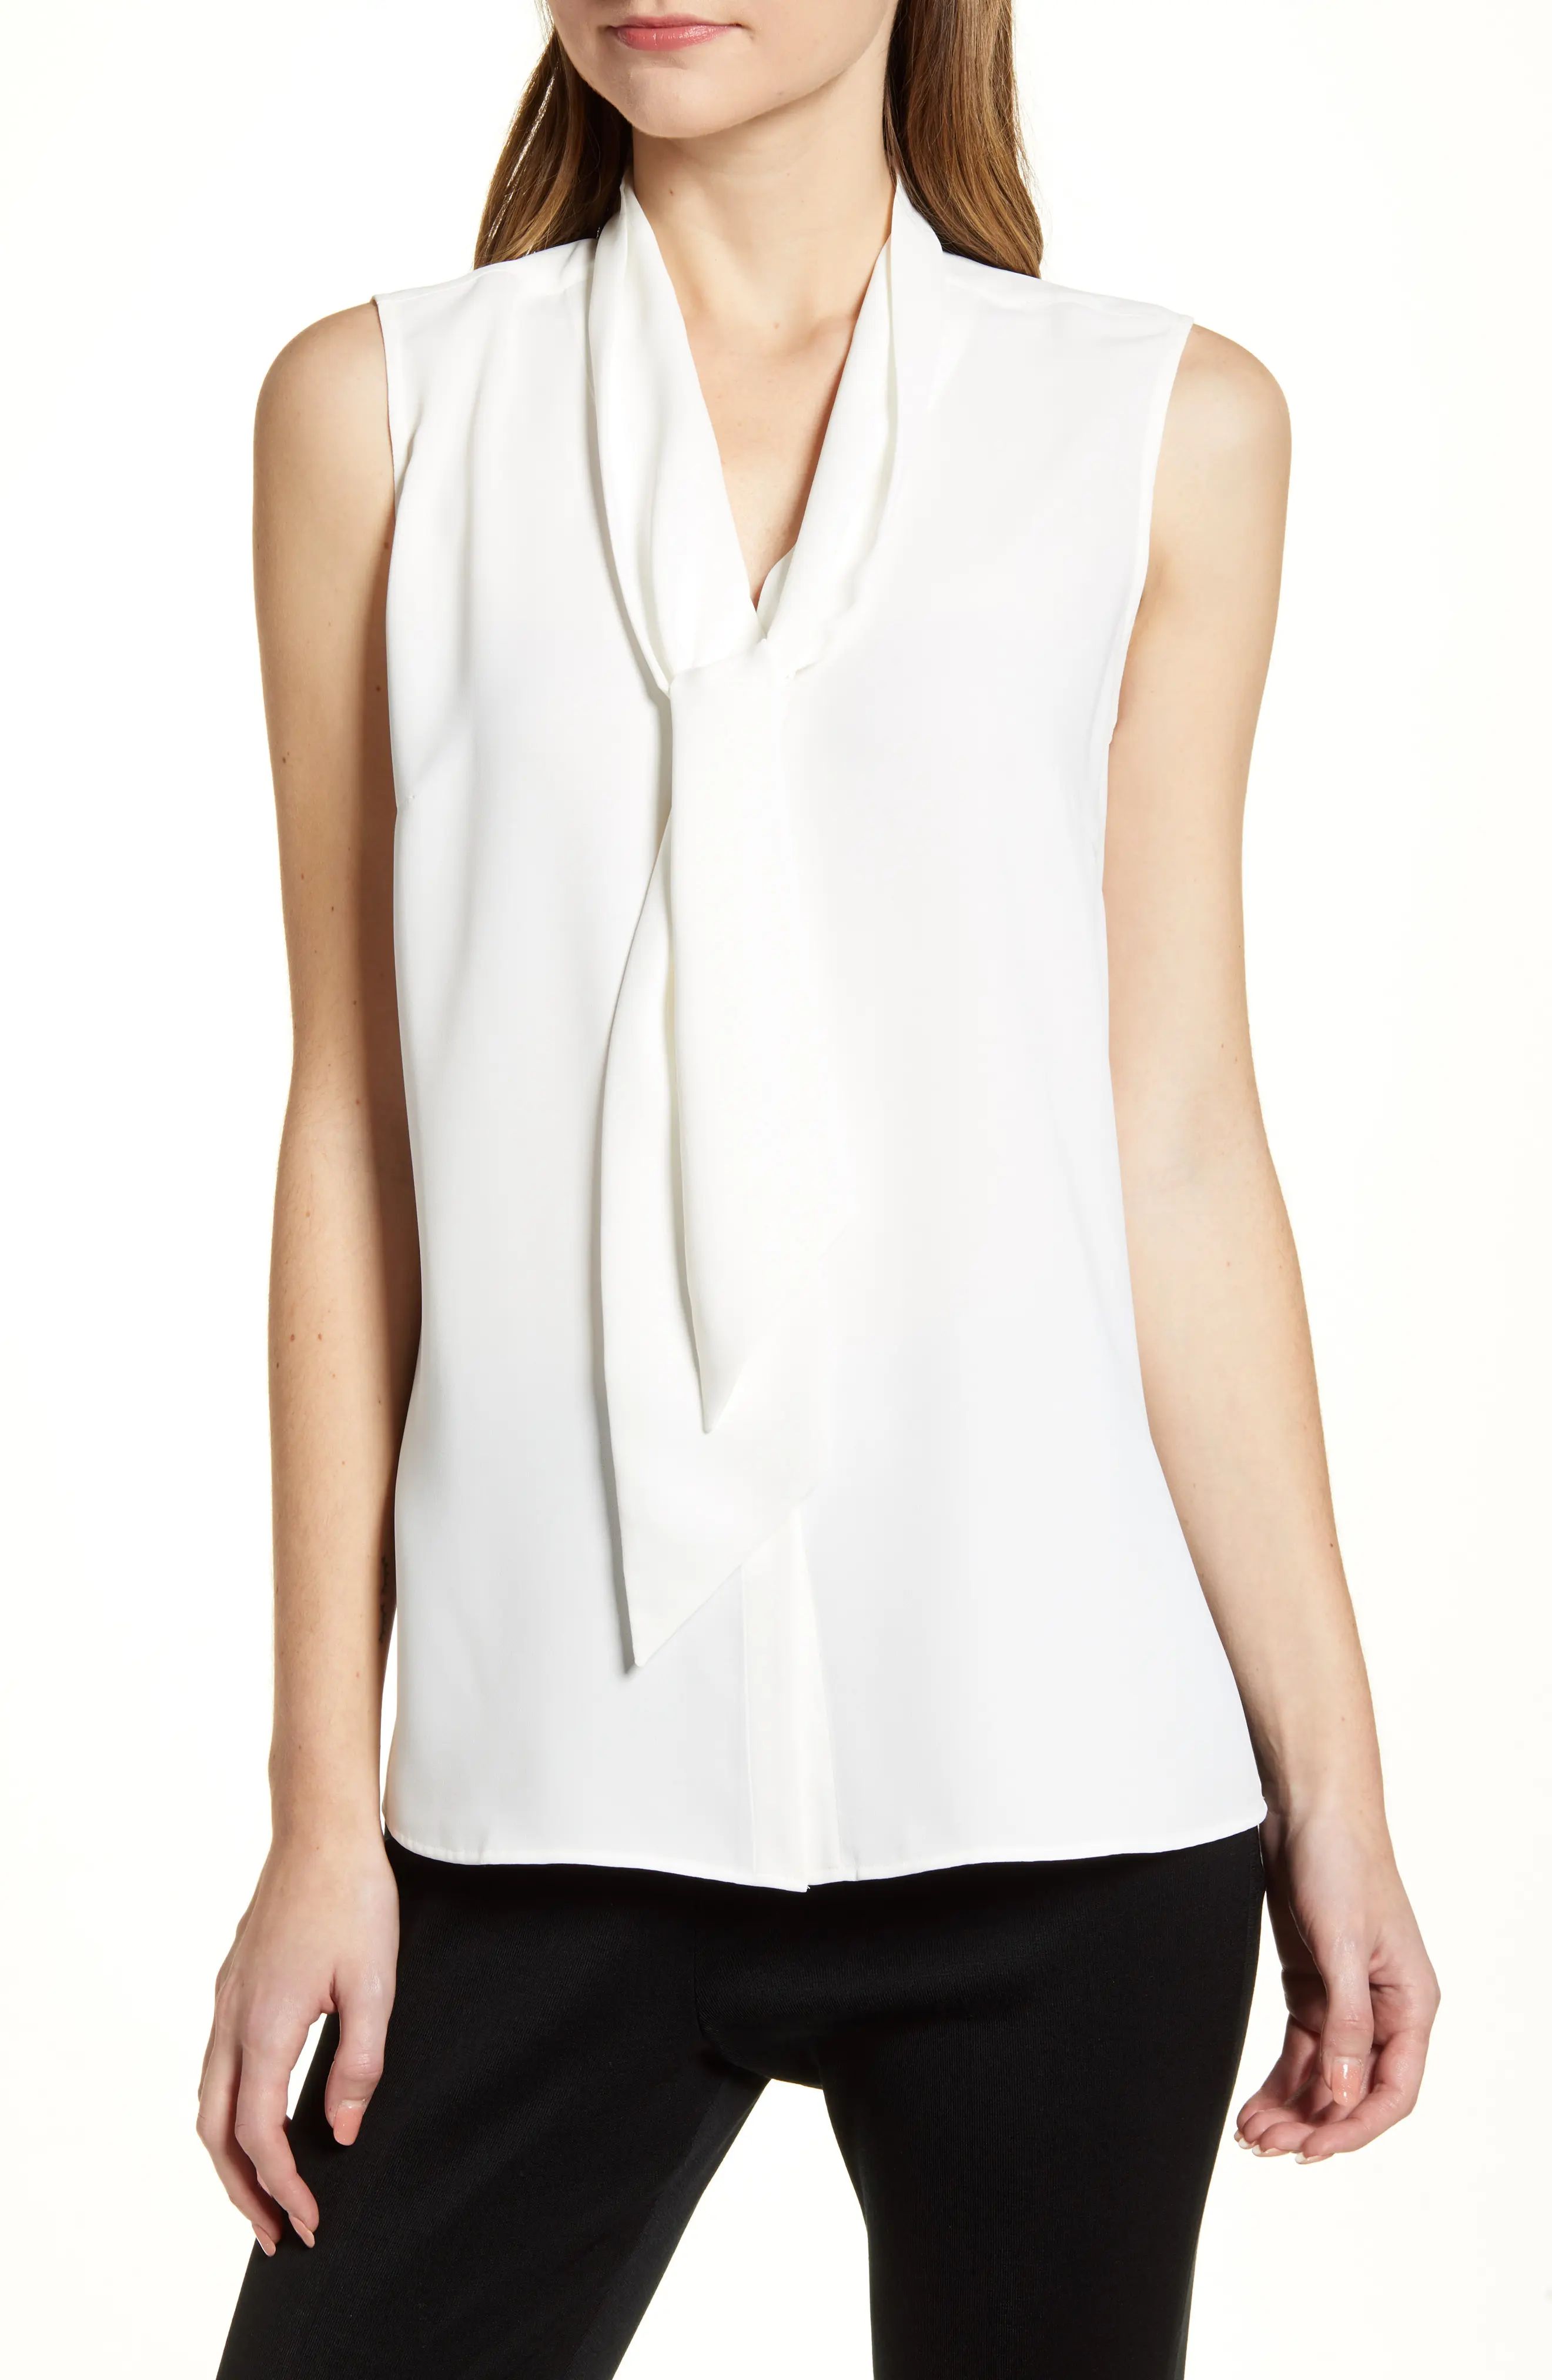 Ming Wang Crepe Tie Neck Sleeveless Blouse in White at Nordstrom, Size Large | Nordstrom